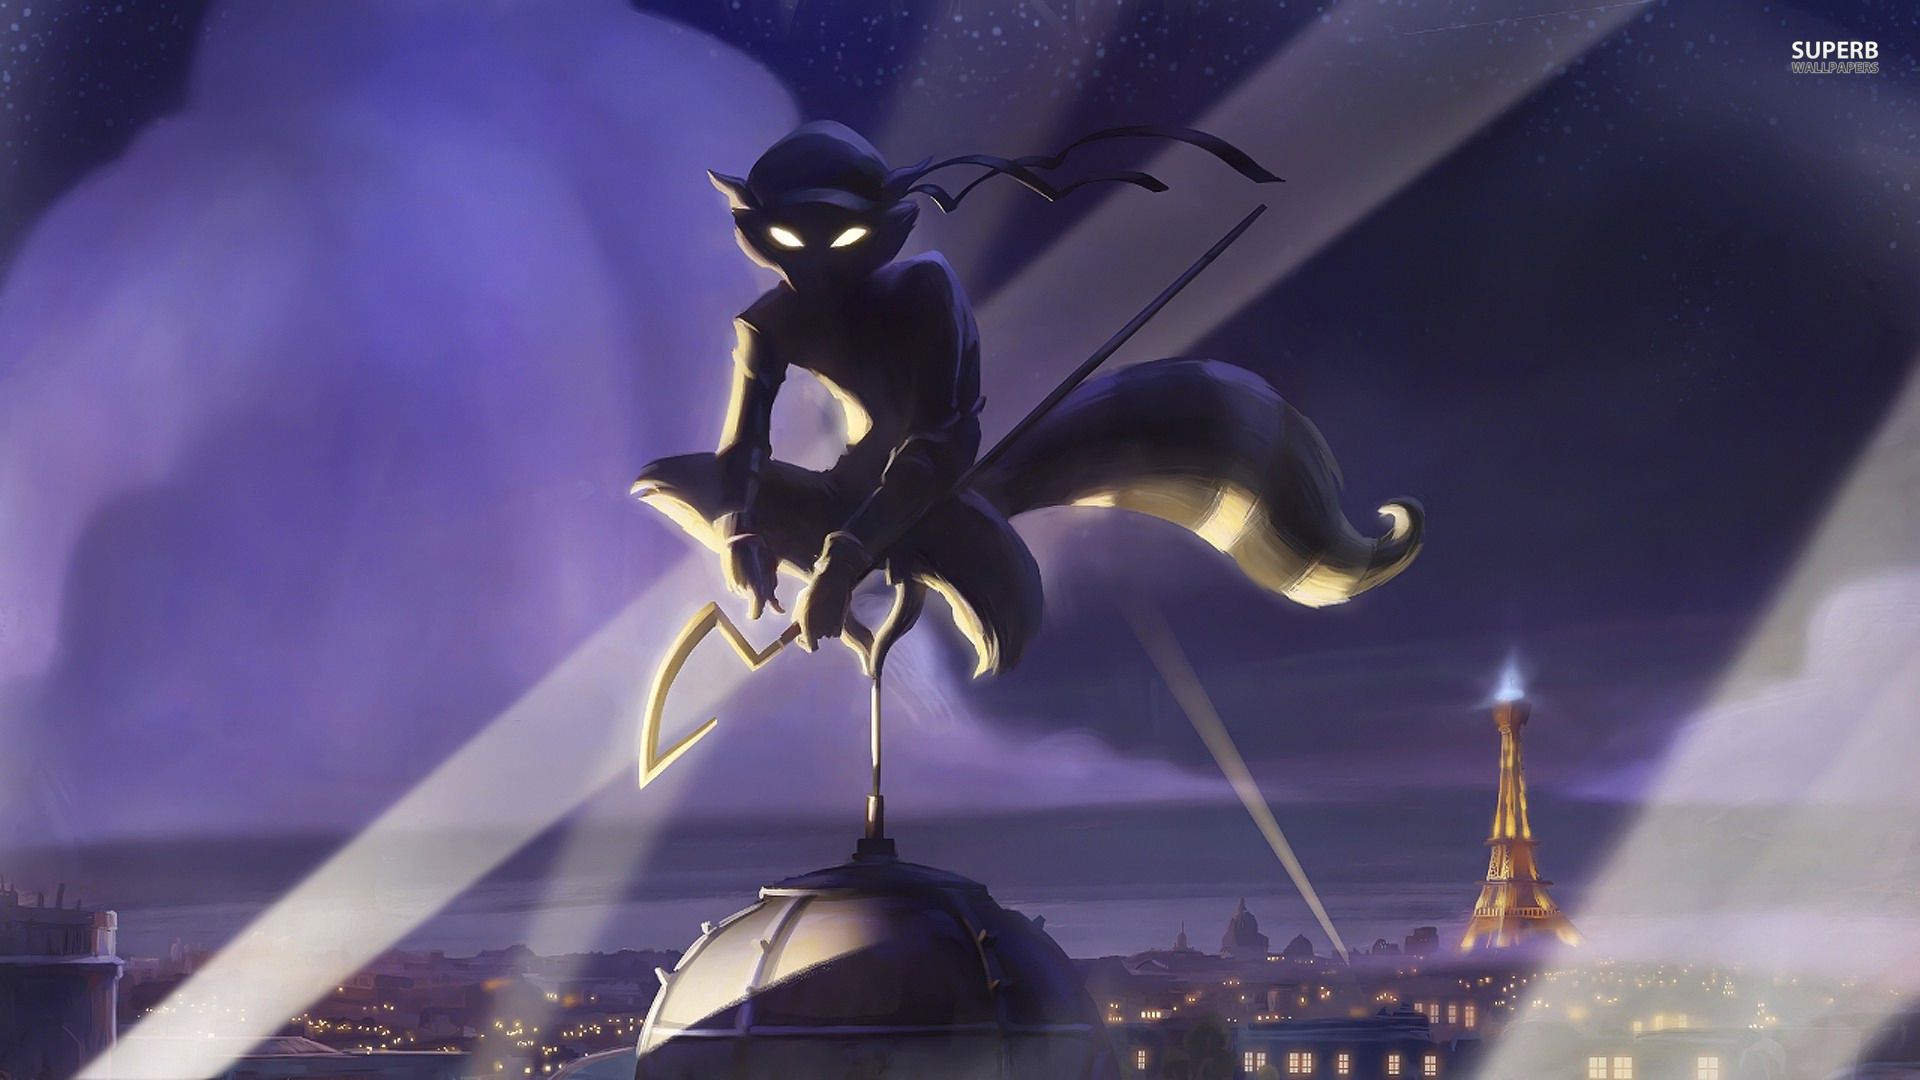 Sly Cooper Thieves in Time Wallpapers   HD Wallpapers Inn 1920x1080